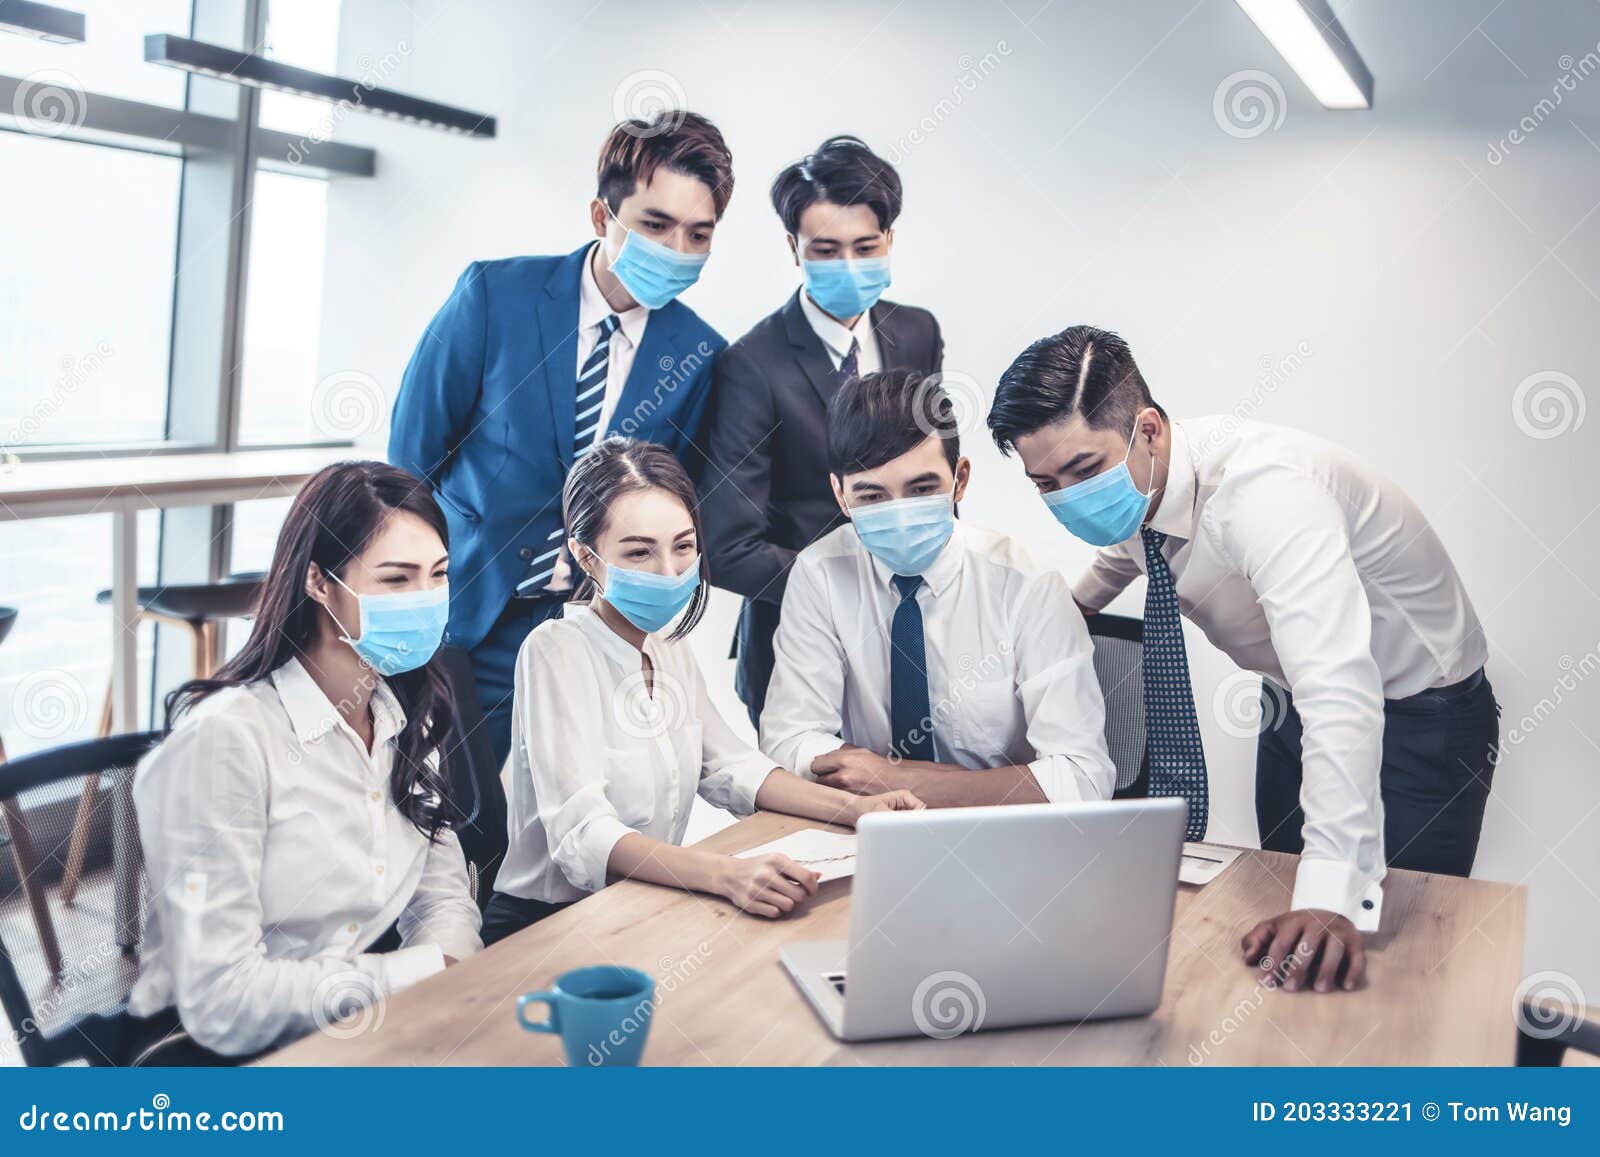 busines people wearing face mask and  business meeting in modern office while pandemic of virus